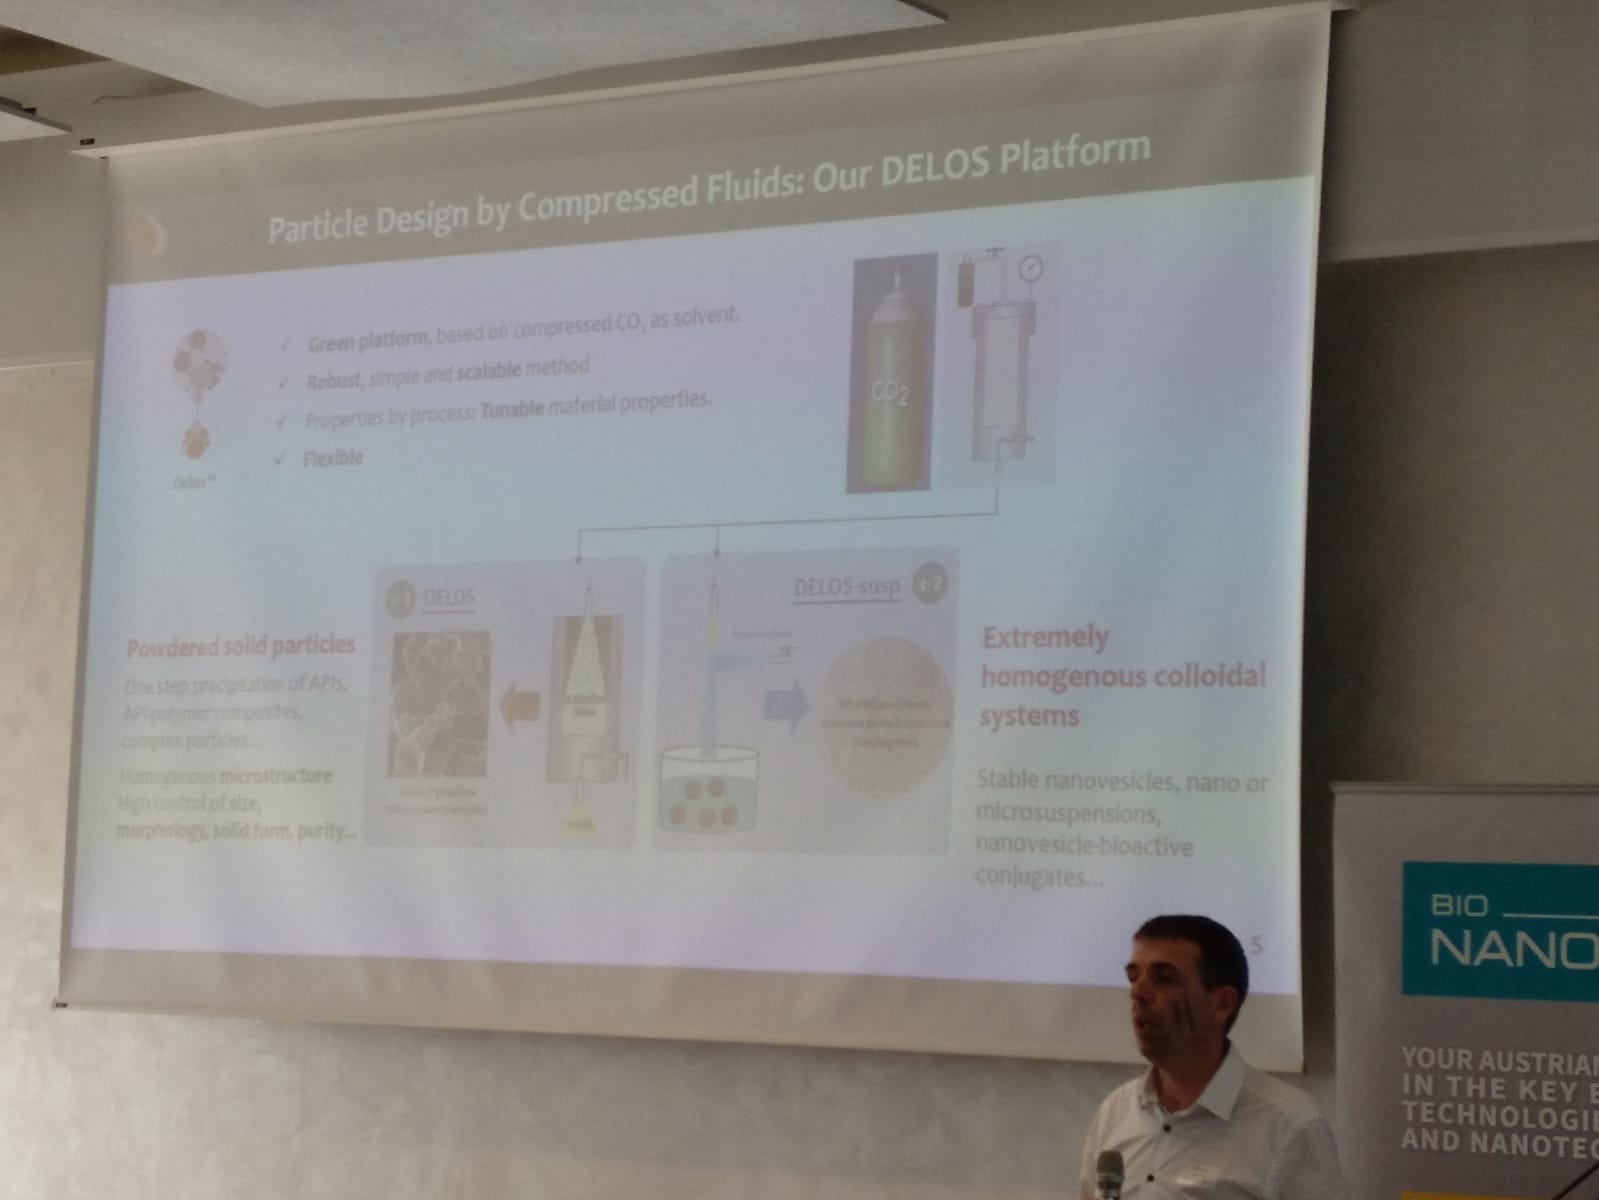 The project was present in Austria for the Rare Diseases day 2019. The presentation of the Smart4Fabry Project and the technology DELOS-SUSP was presented by Johanna and Santi Sala (respectively) in the frame of the "First Austrian Microfluidics Initiative Symposium" hold the 28th February in Viena. In this Symposium organized by TUWien, TUGraz, Univ. Salzburg and BioNanoNet, a specific session with title "Rare Disease Day 2019" was scheduled. In this session three presentations were hold: Smart4Fabry project, Nanomol Technologies and its DELOS Susp technology and the H2020-MSCA-RISE-2017 "CISTEM" project